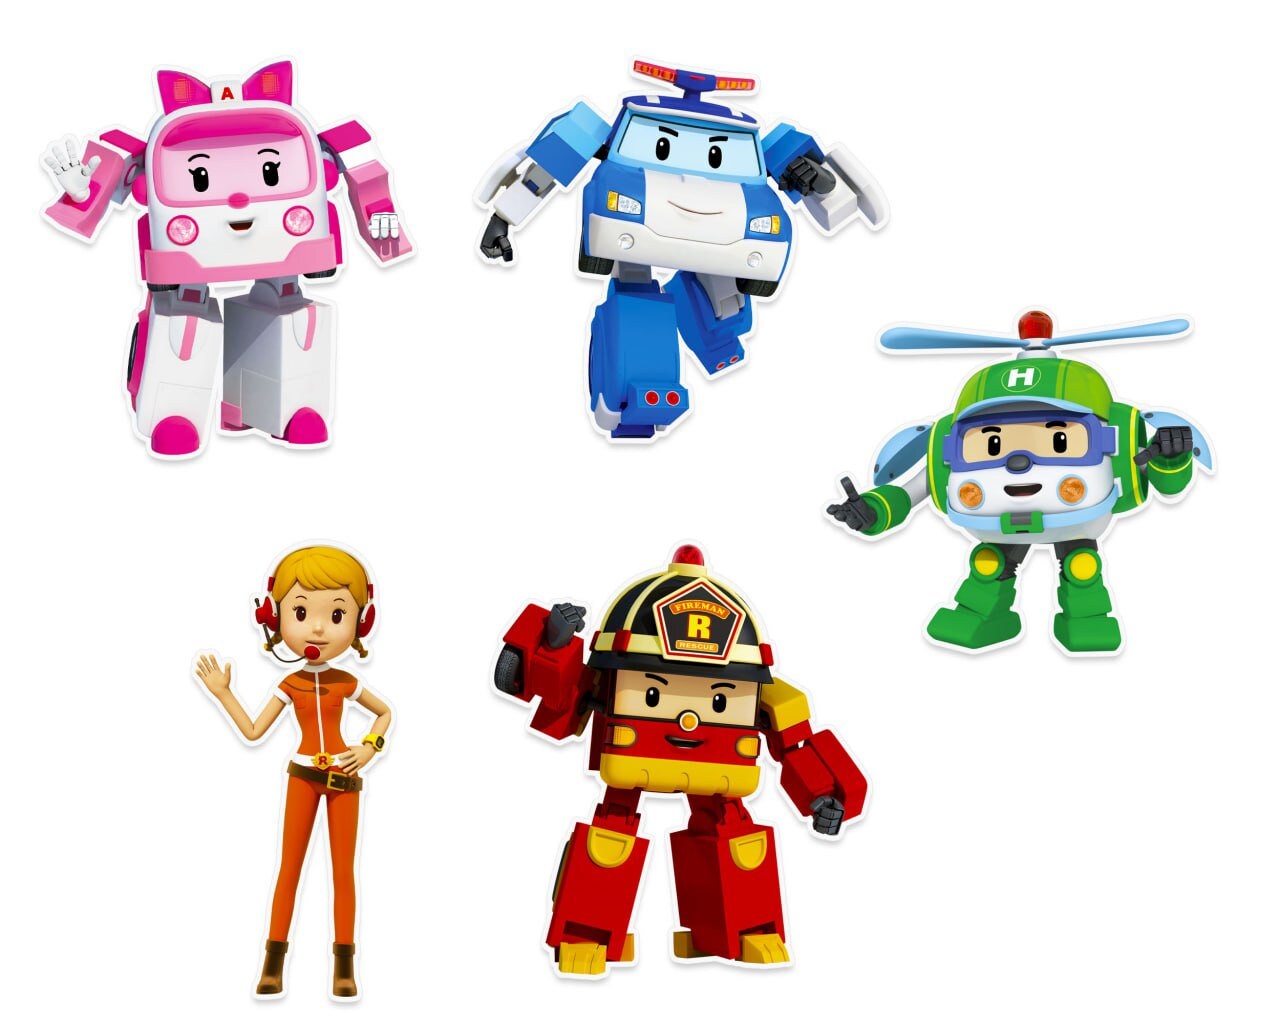 Transform Your Room with Robocar Poli Wall Stickers - Set of 5 Action-Packed Decals for Kids!